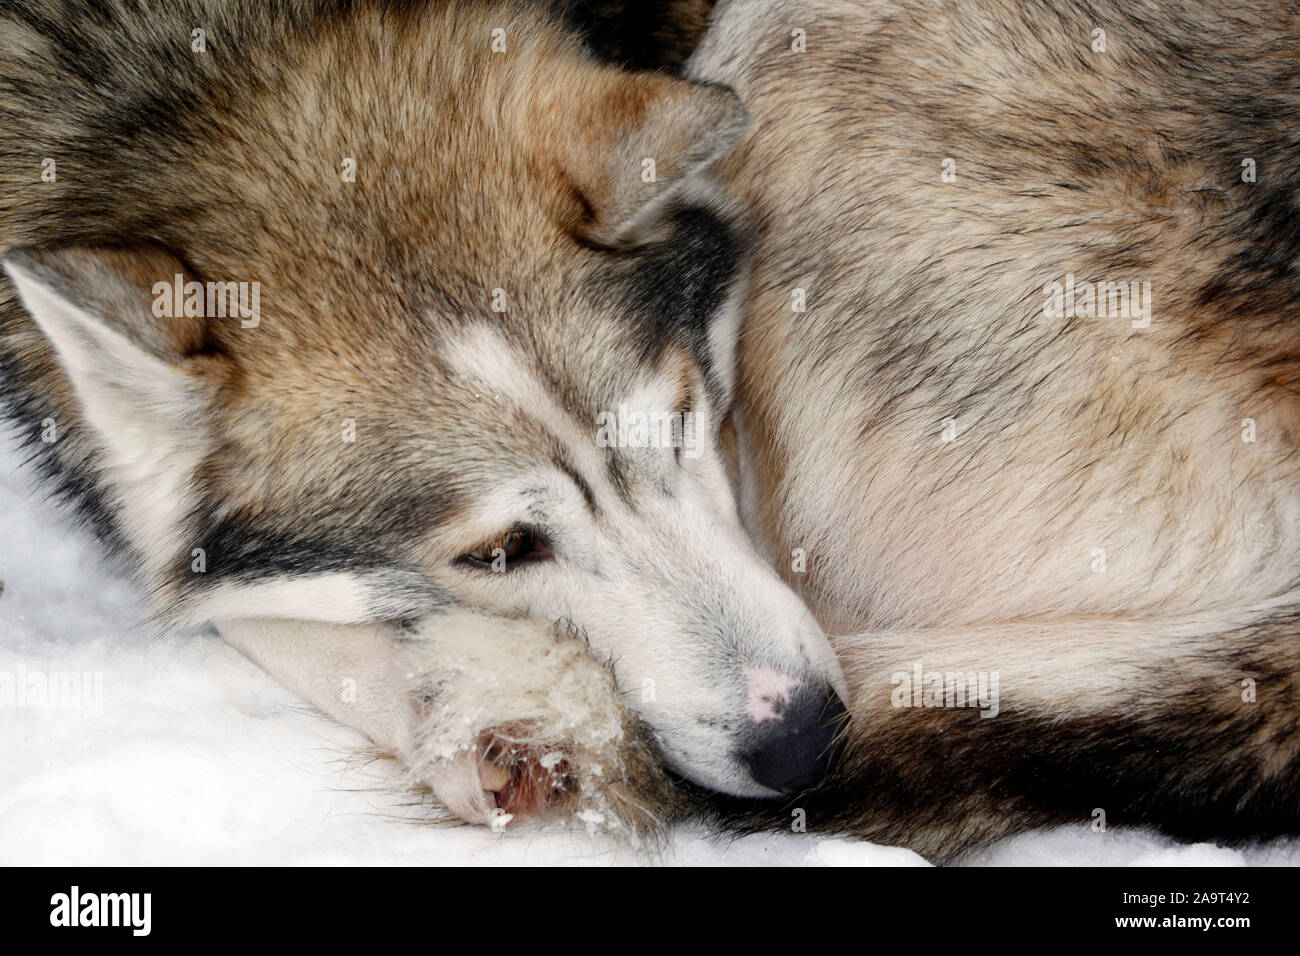 Schlafenden High Resolution Stock Photography and Images - Alamy